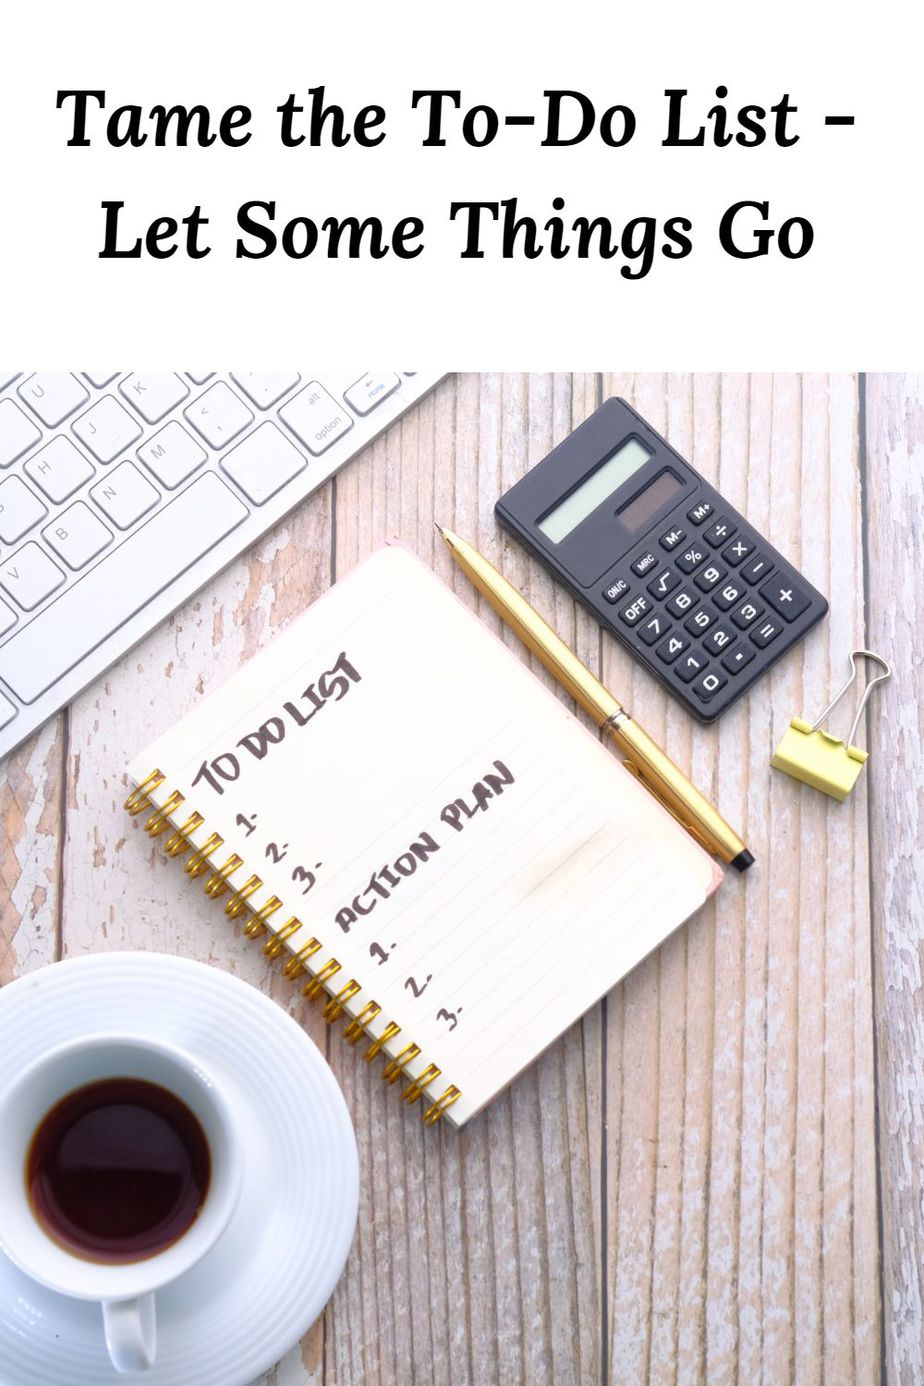 Tame the To-Do List - Let Some Things Go